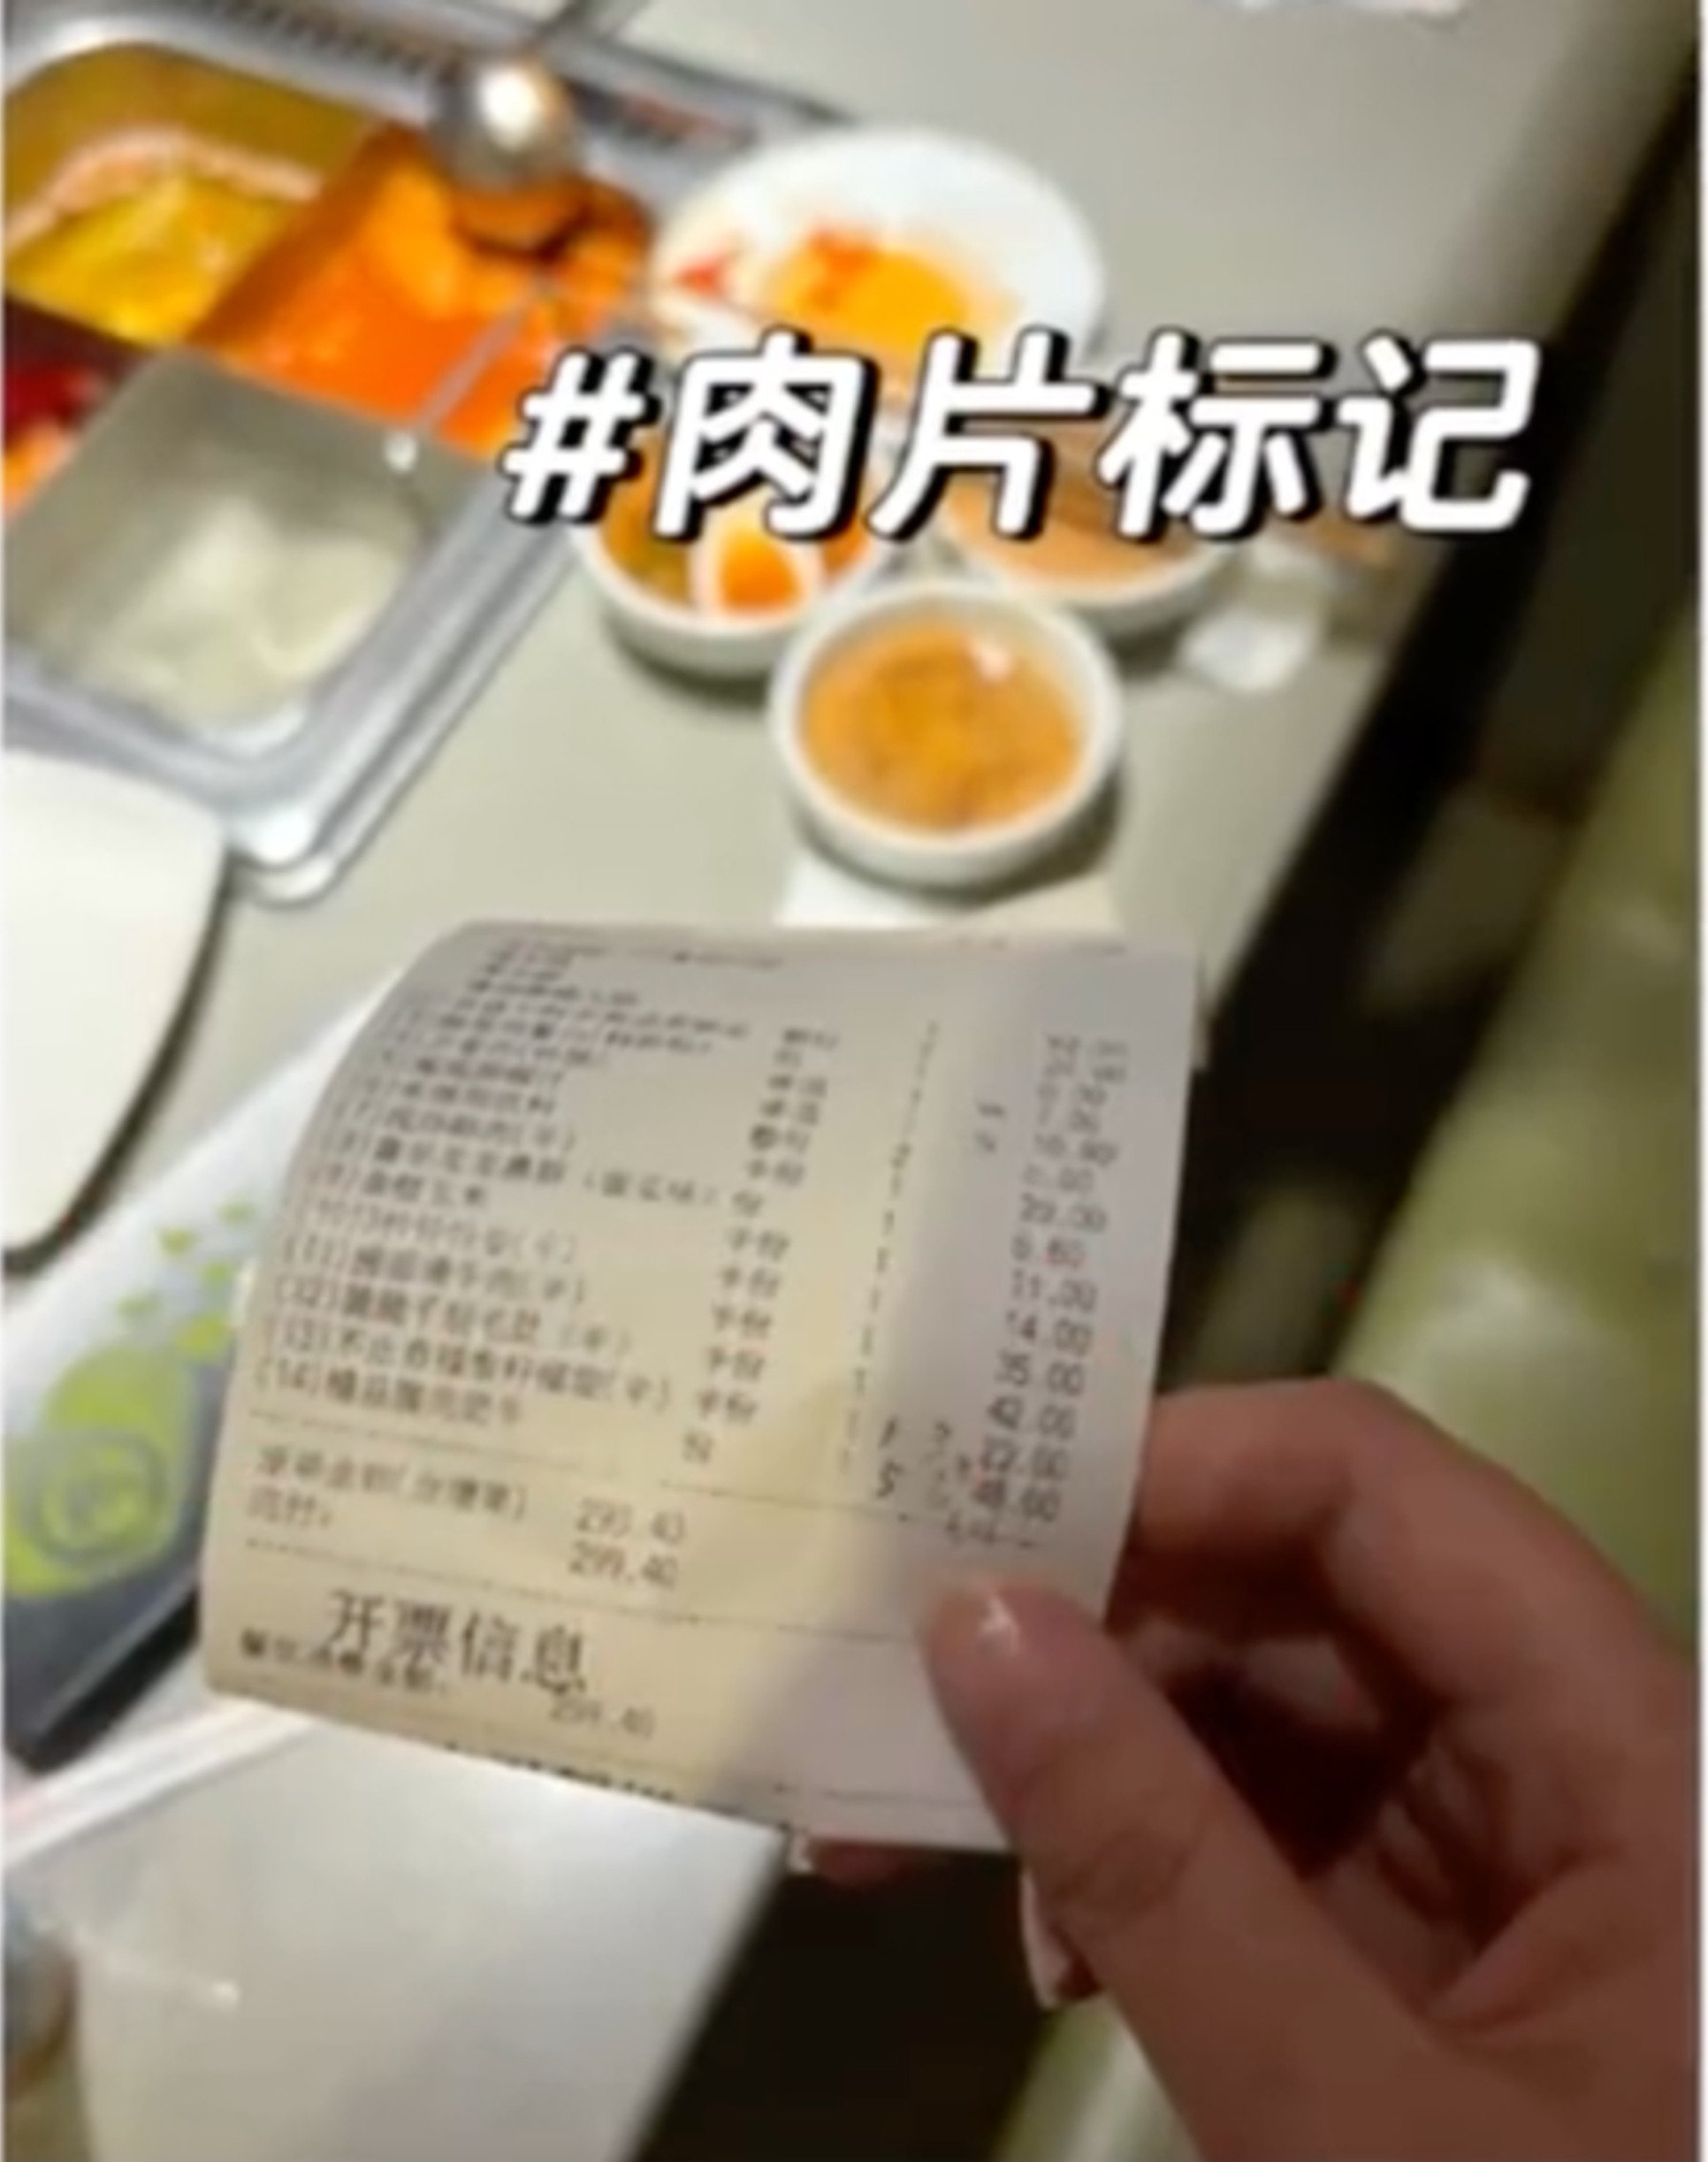 After the cost splitting, the woman found herself paying 48.6 yuan (US$6.7) more than her date. Photo: Weibo